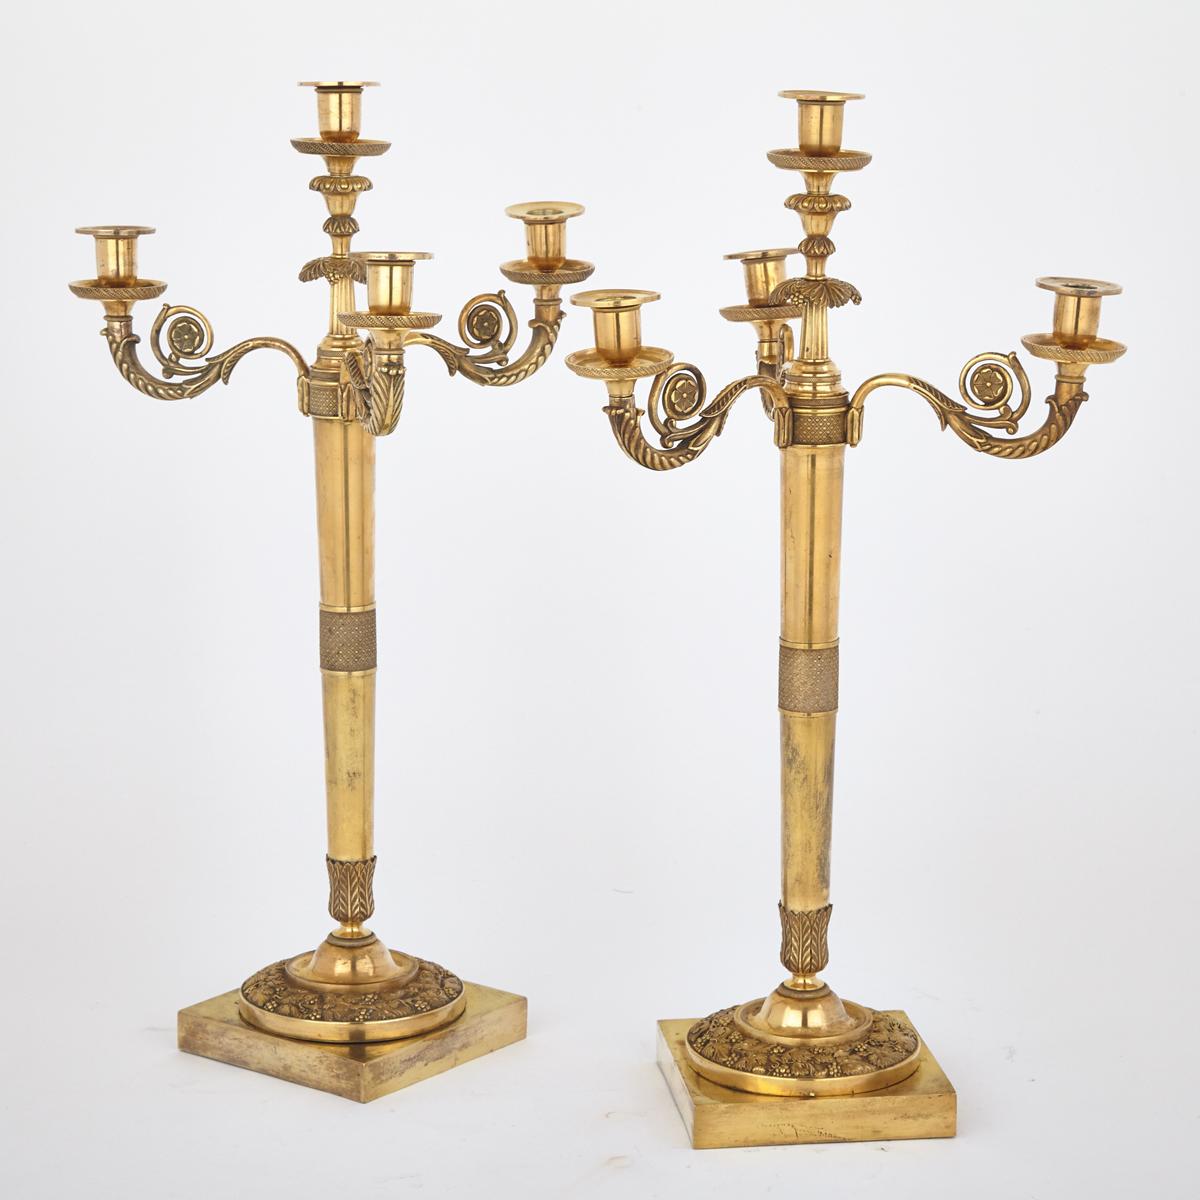 Pair of French Empire Style Gilt Bronze Candelabra, 19th century